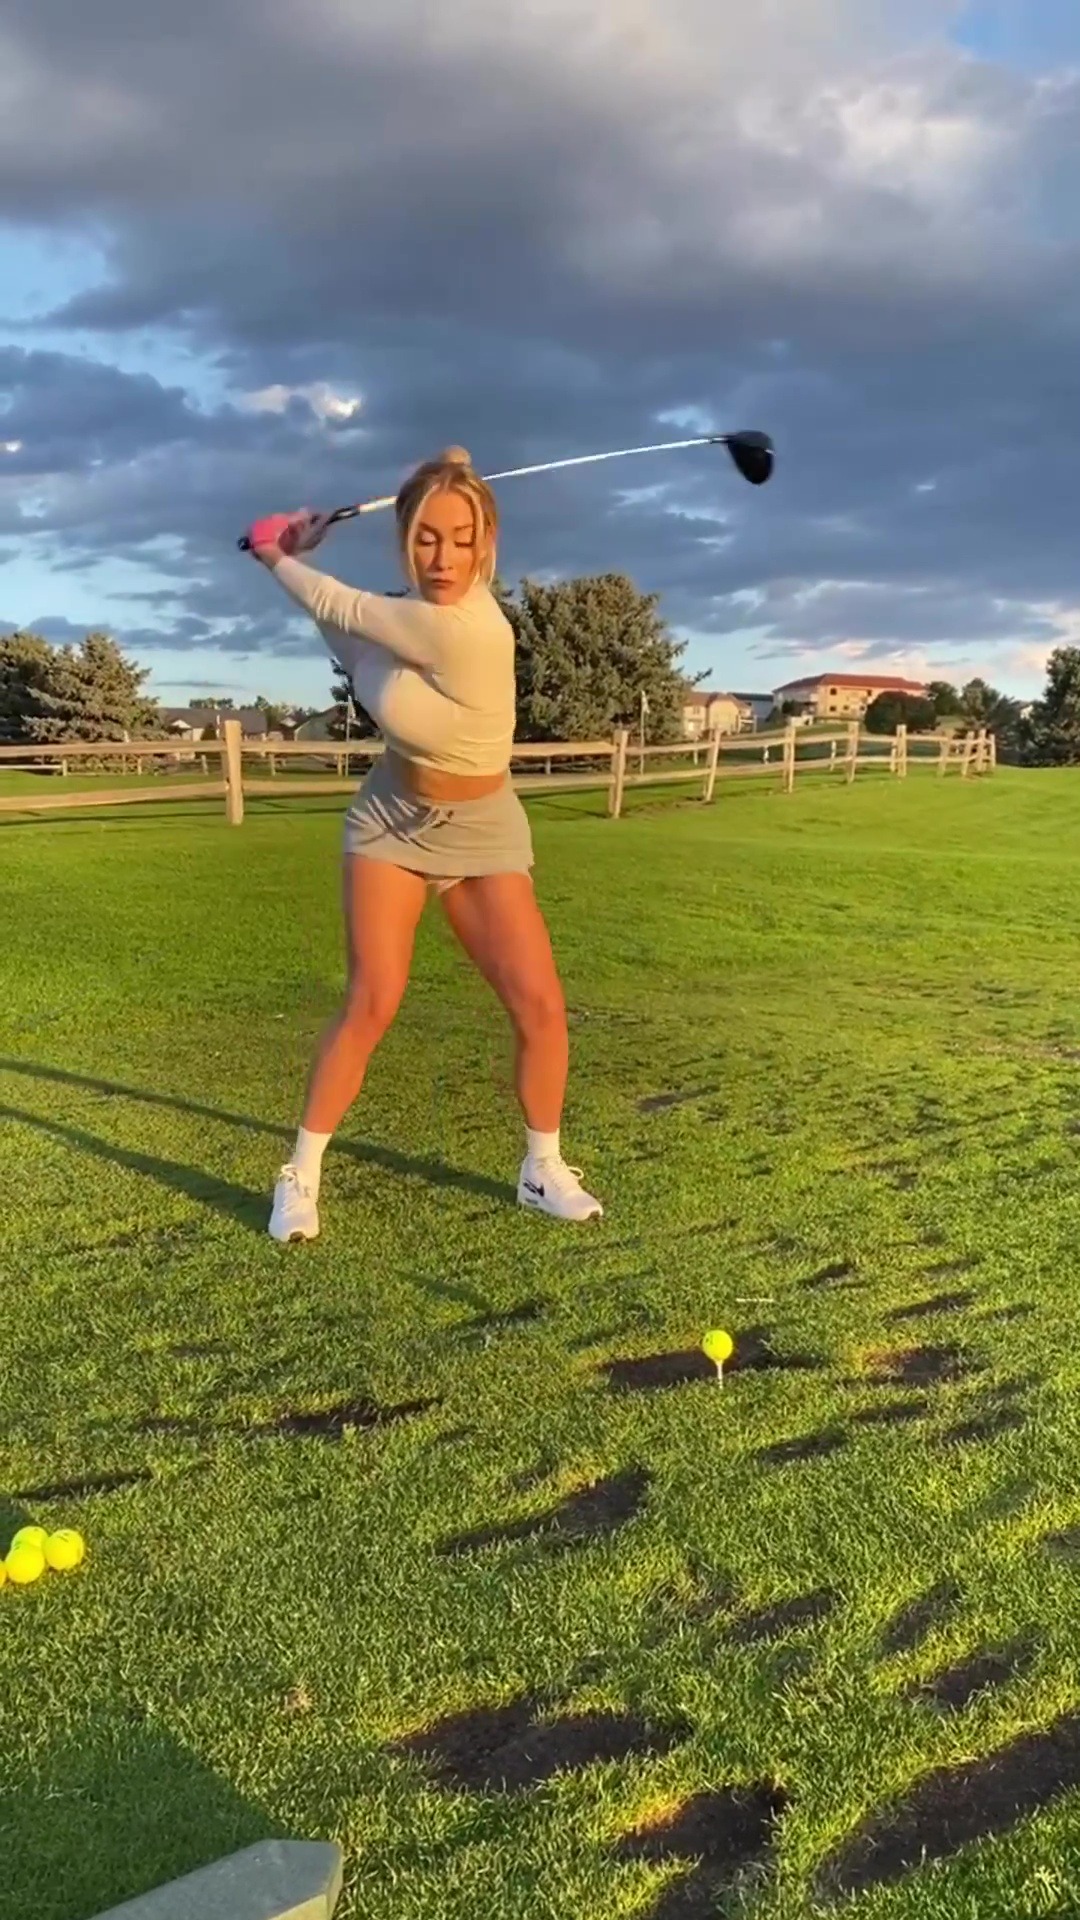 , Watch Paige Spiranac’s driving technique as she smashes golf ball while wearing figure-hugging top and mini-skirt